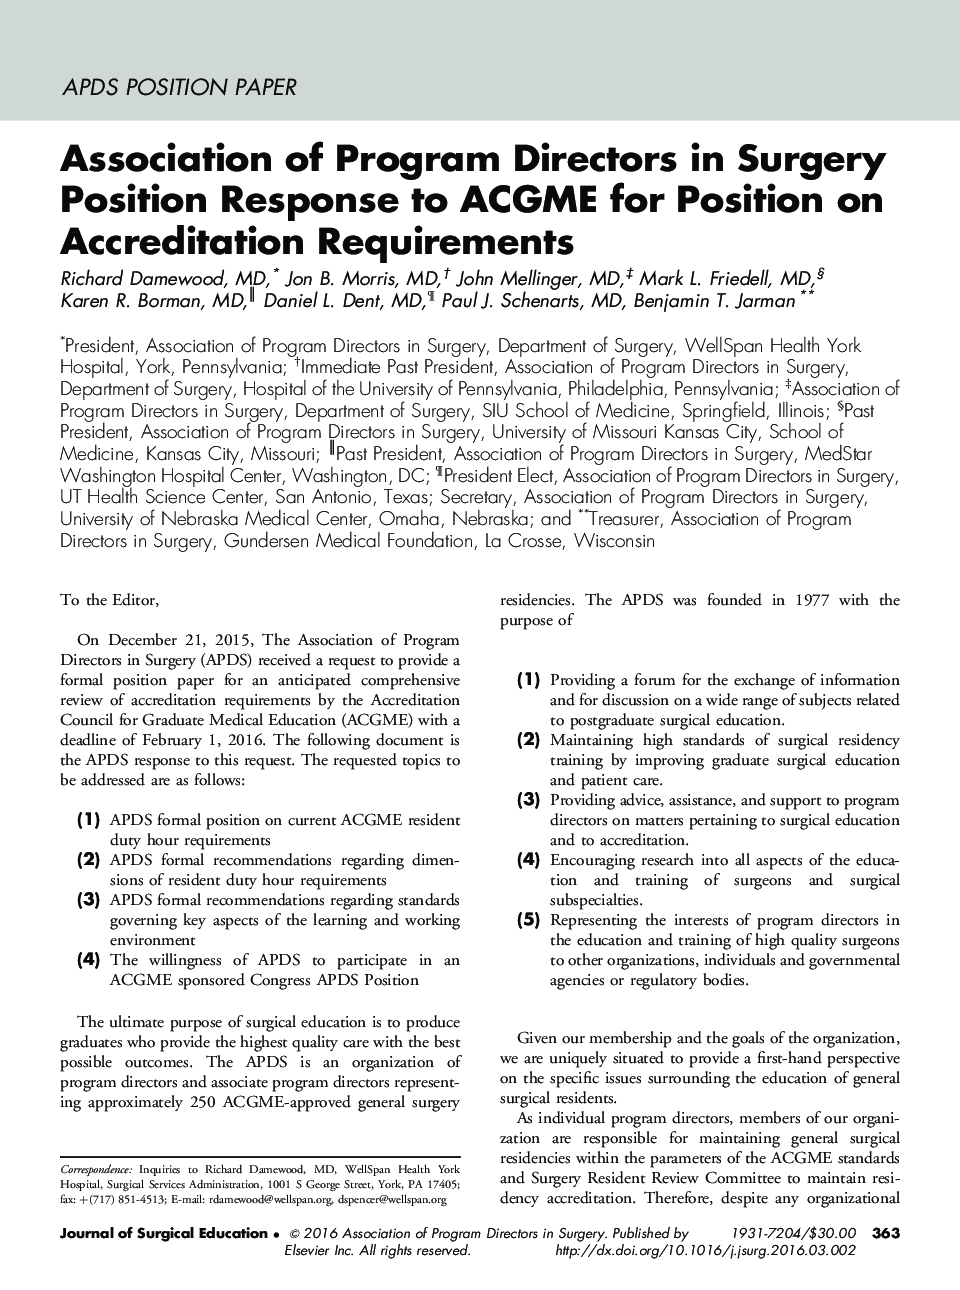 Association of Program Directors in Surgery Position Response to ACGME for Position on Accreditation Requirements